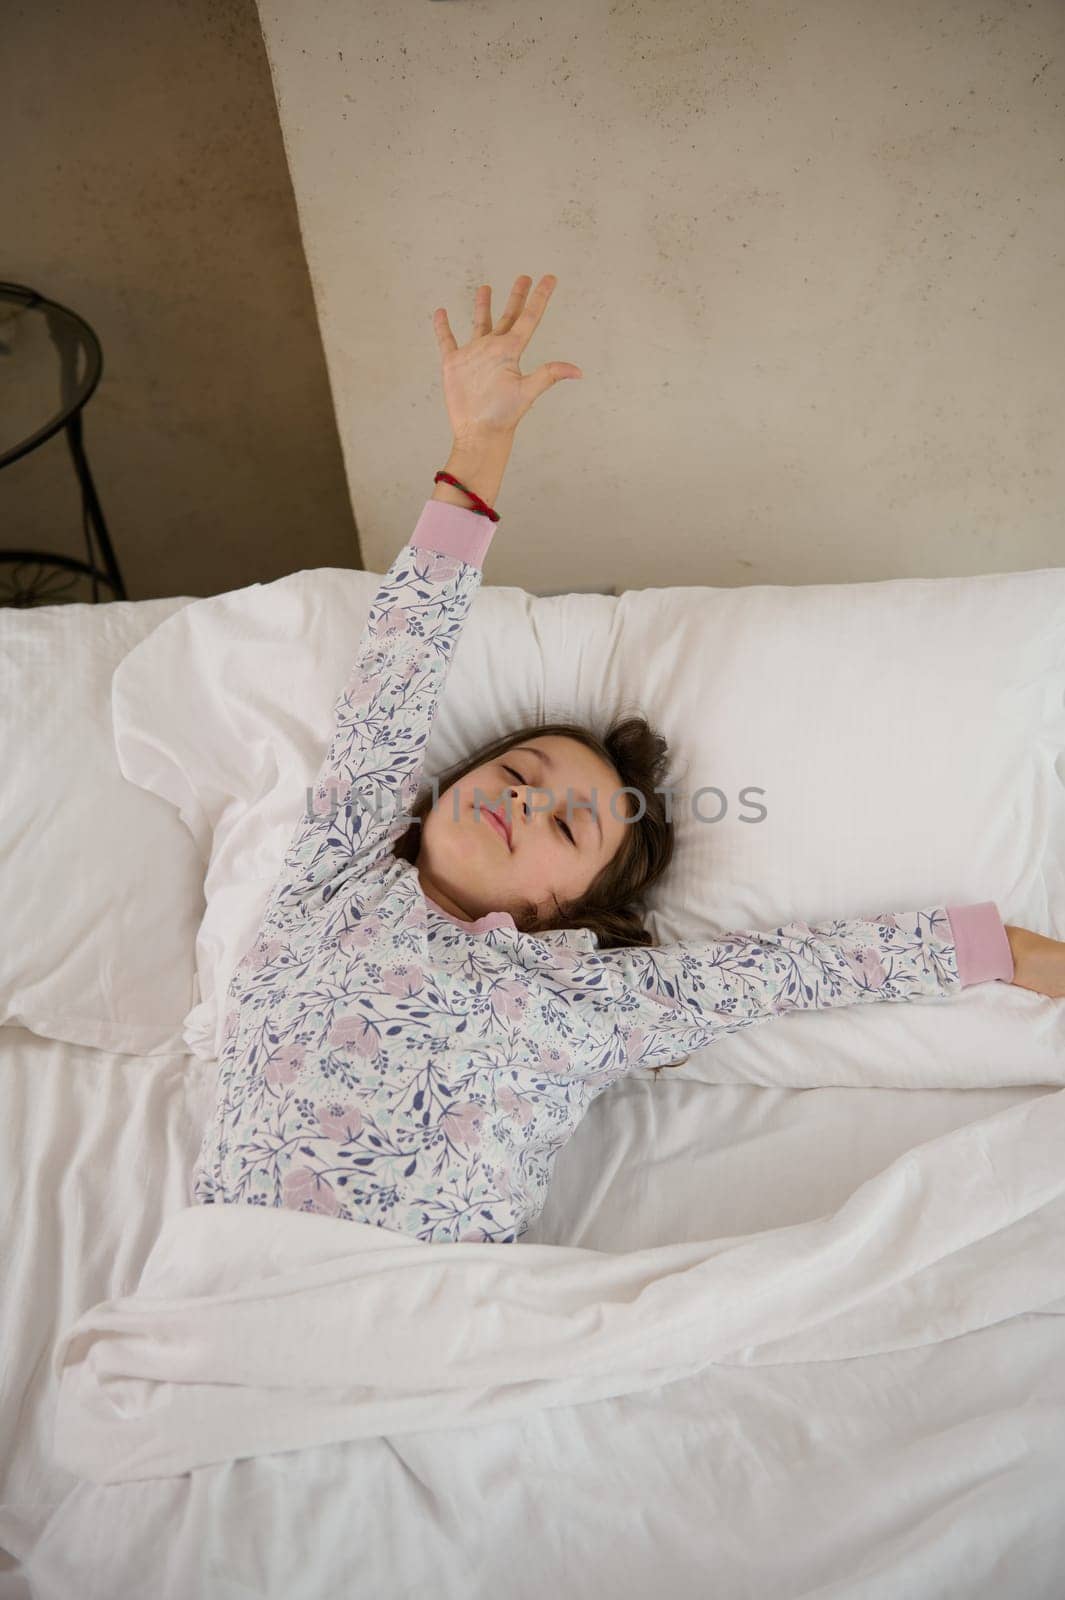 Authentic happy little child girl lying on the bed and stretching her arms upwards while waking up in the morning by artgf